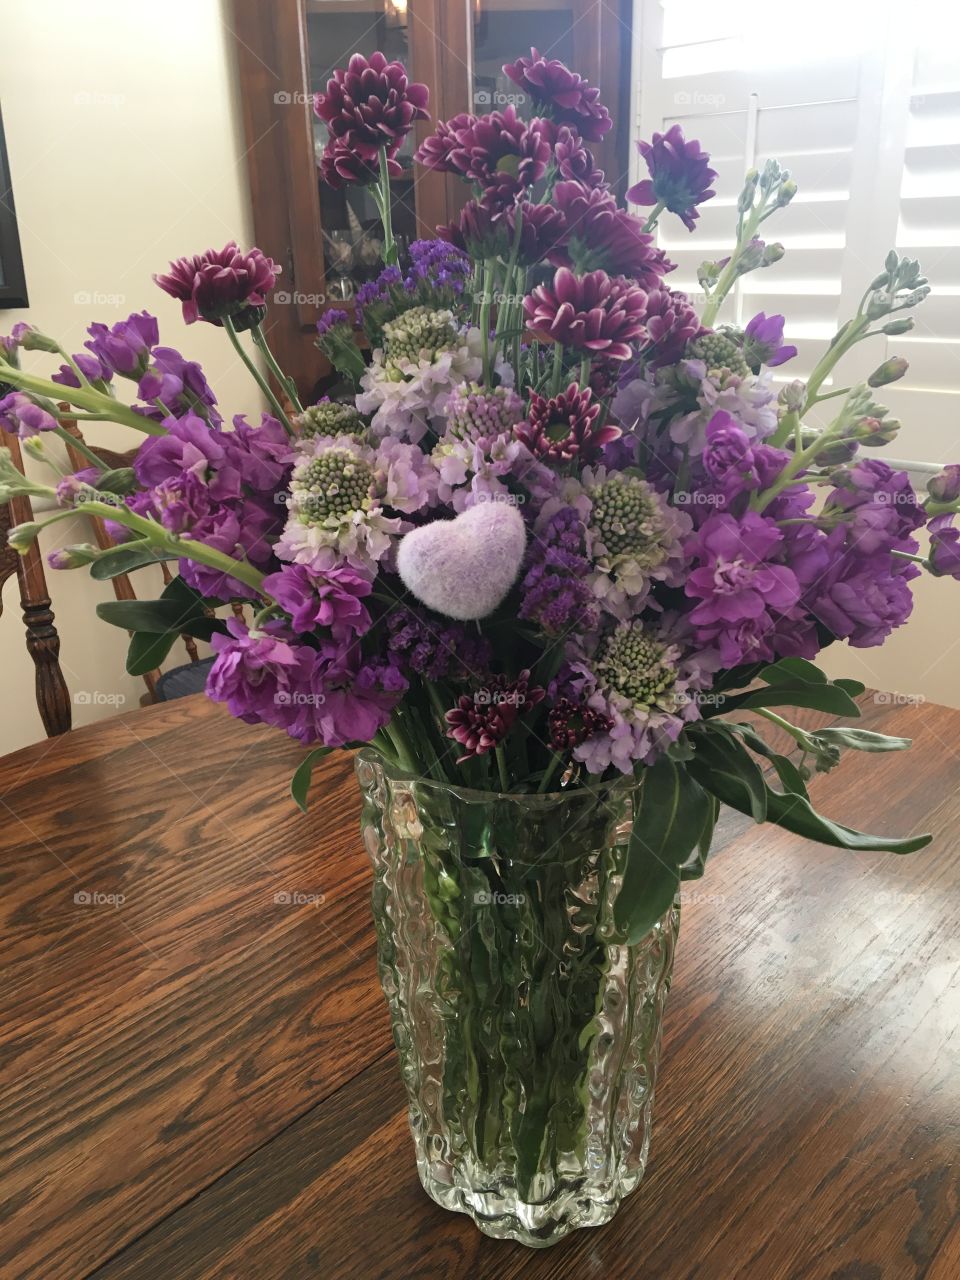 Lavender flowers, stock, Scabiosa, pom-poms and hearts